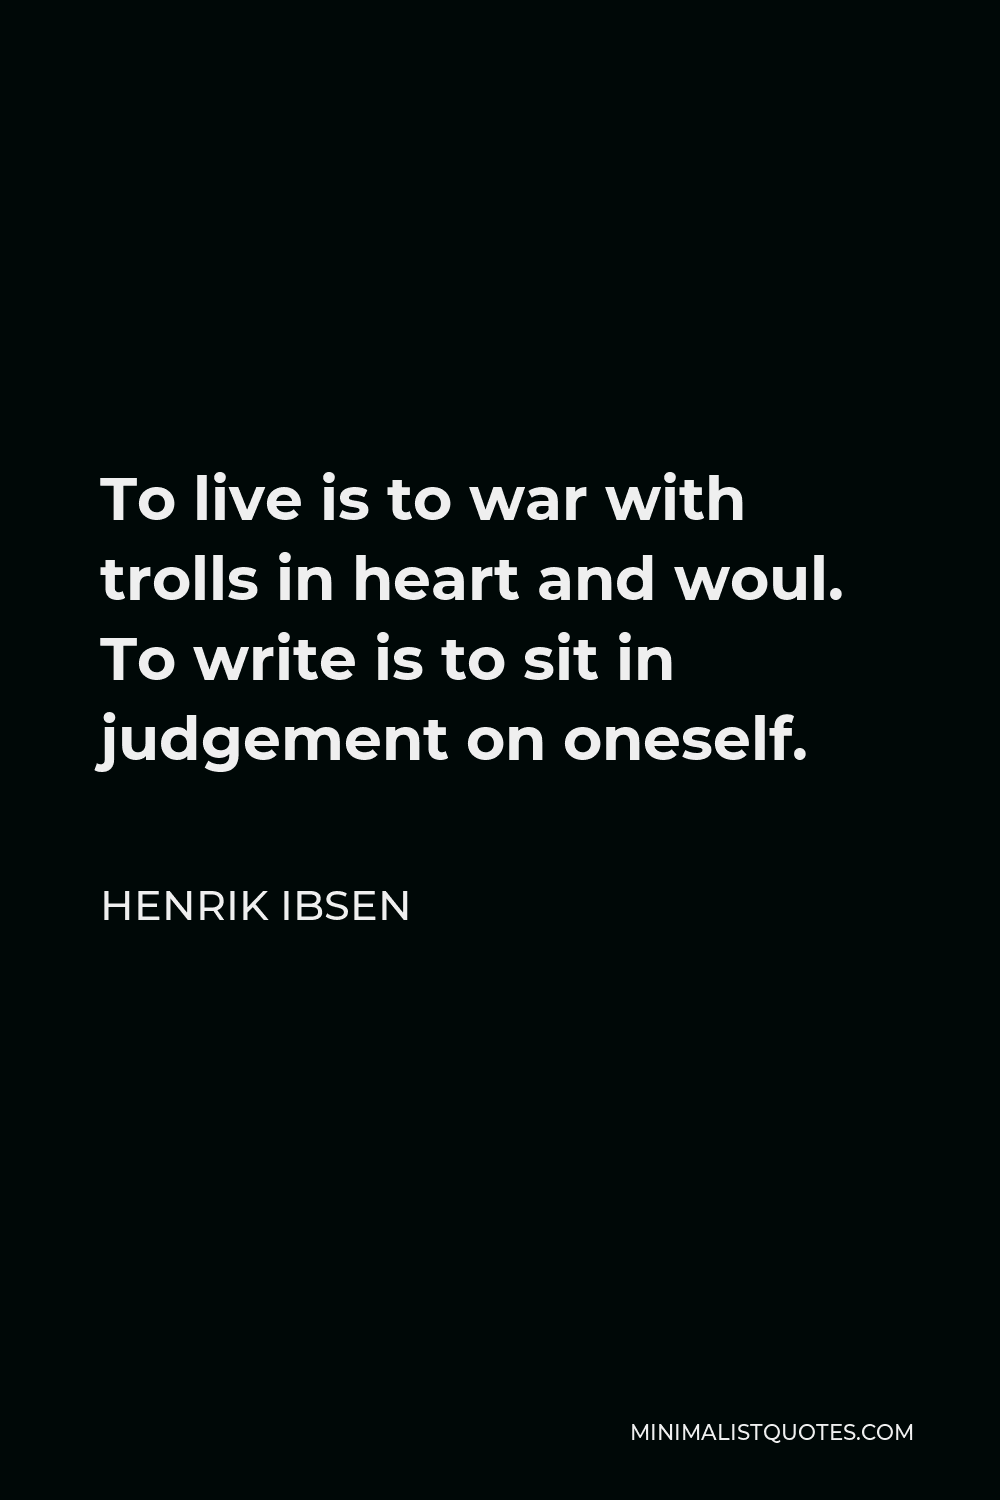 Henrik Ibsen Quote - To live is to war with trolls in heart and woul. To write is to sit in judgement on oneself.